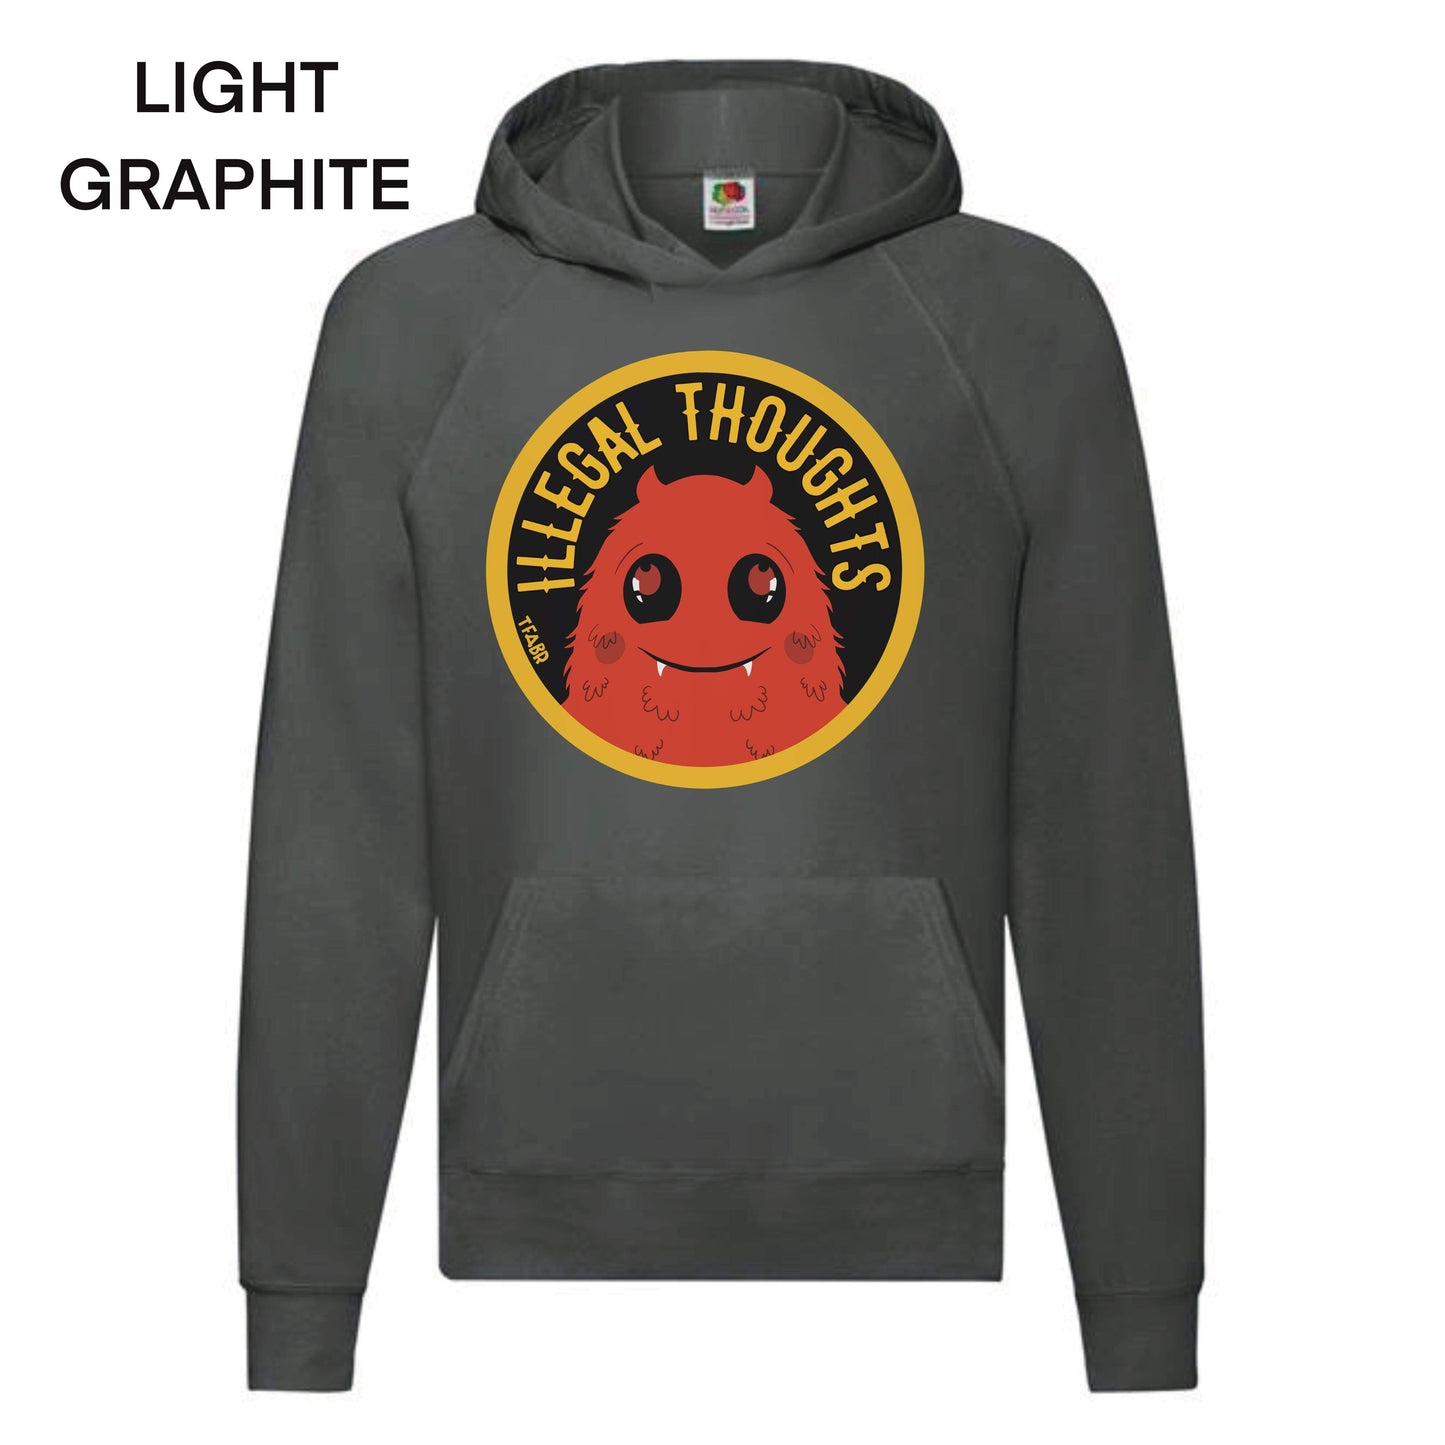 Illegal Thoughts! Hoodie